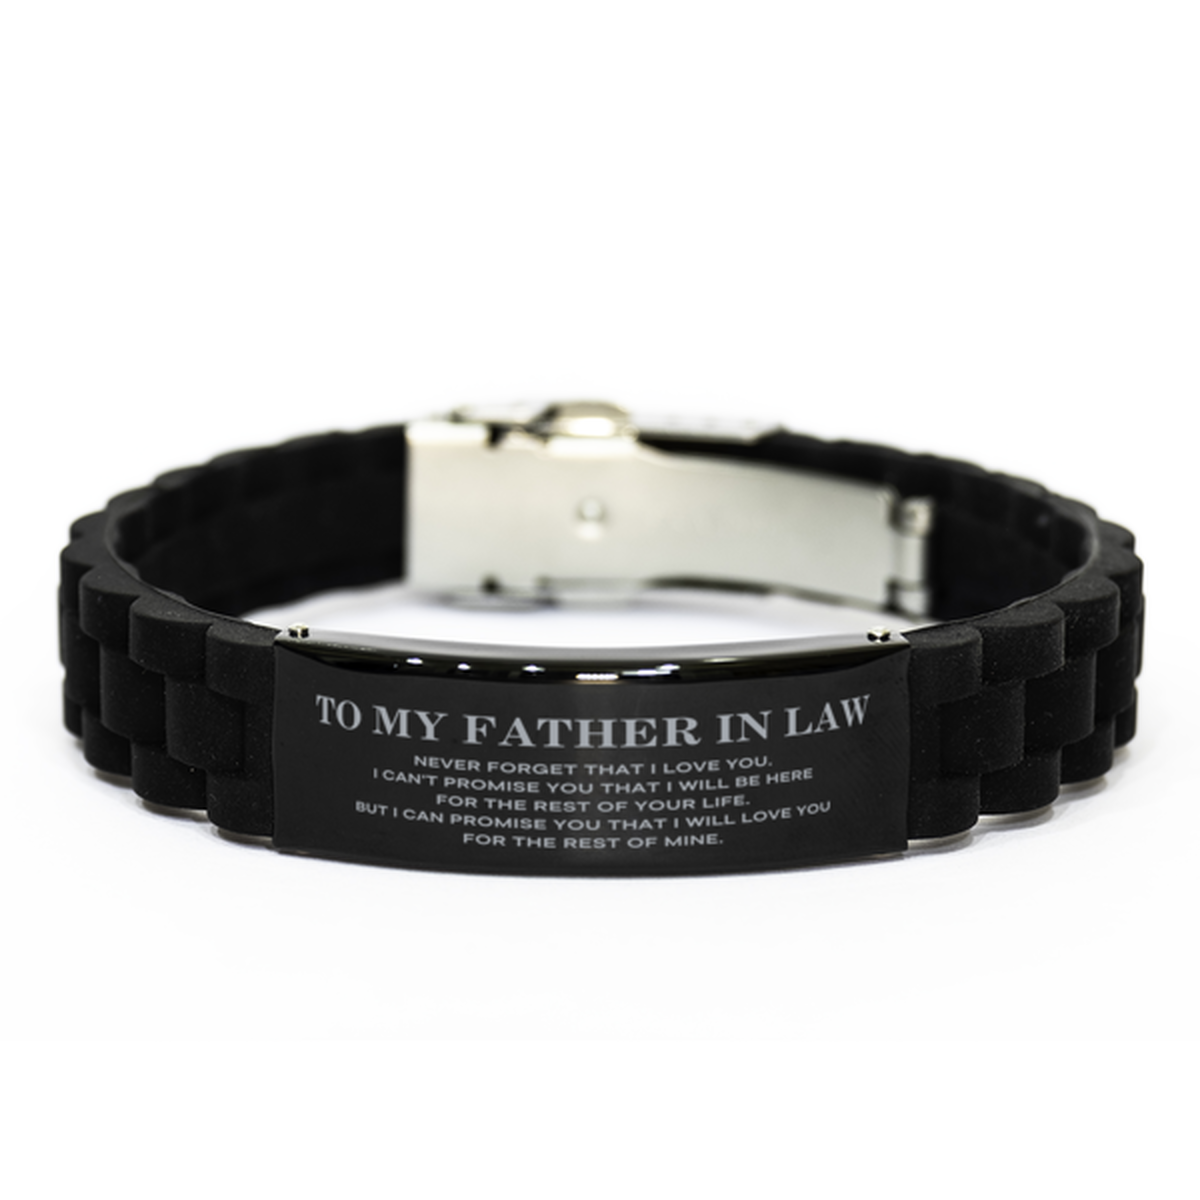 To My Father In Law Gifts, I will love you for the rest of mine, Love Father In Law Bracelet, Birthday Christmas Unique Black Glidelock Clasp Bracelet For Father In Law